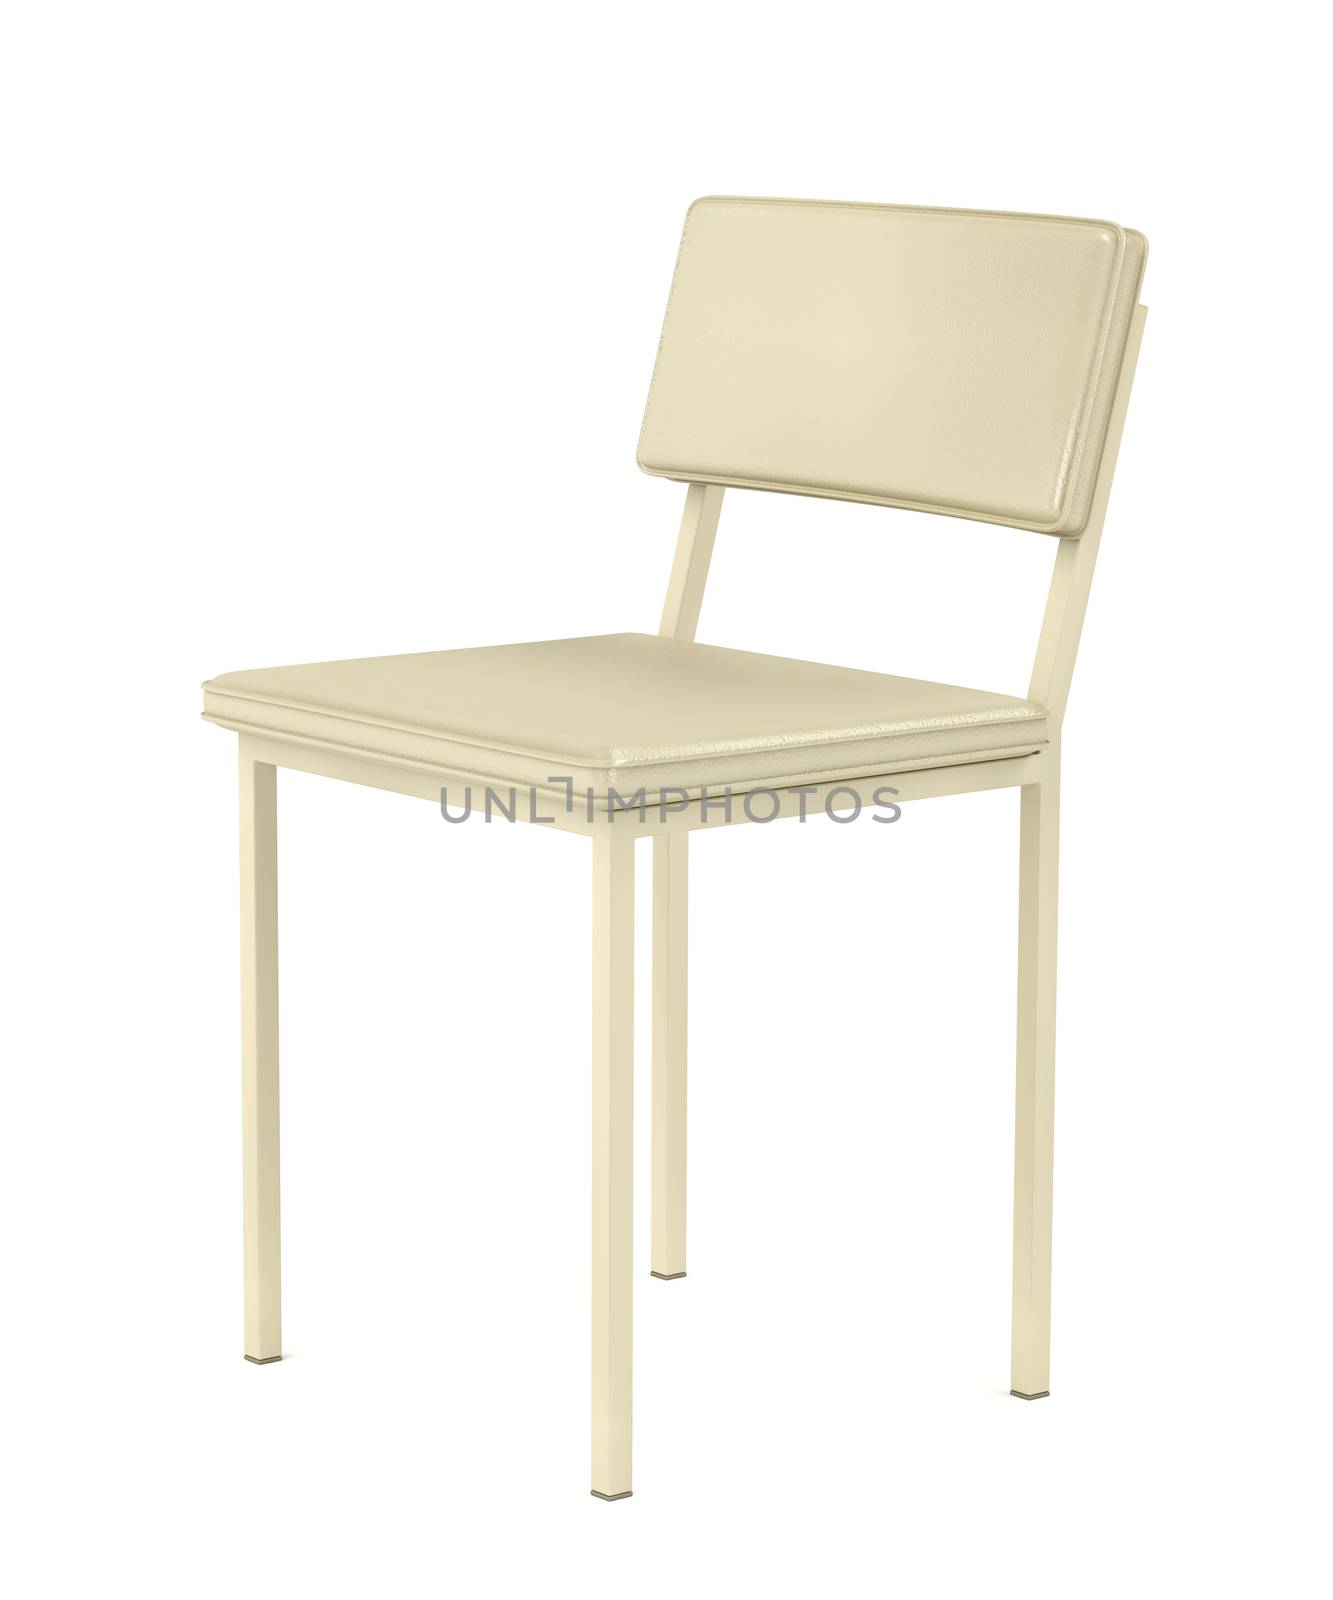 Beige dining chair on white by magraphics